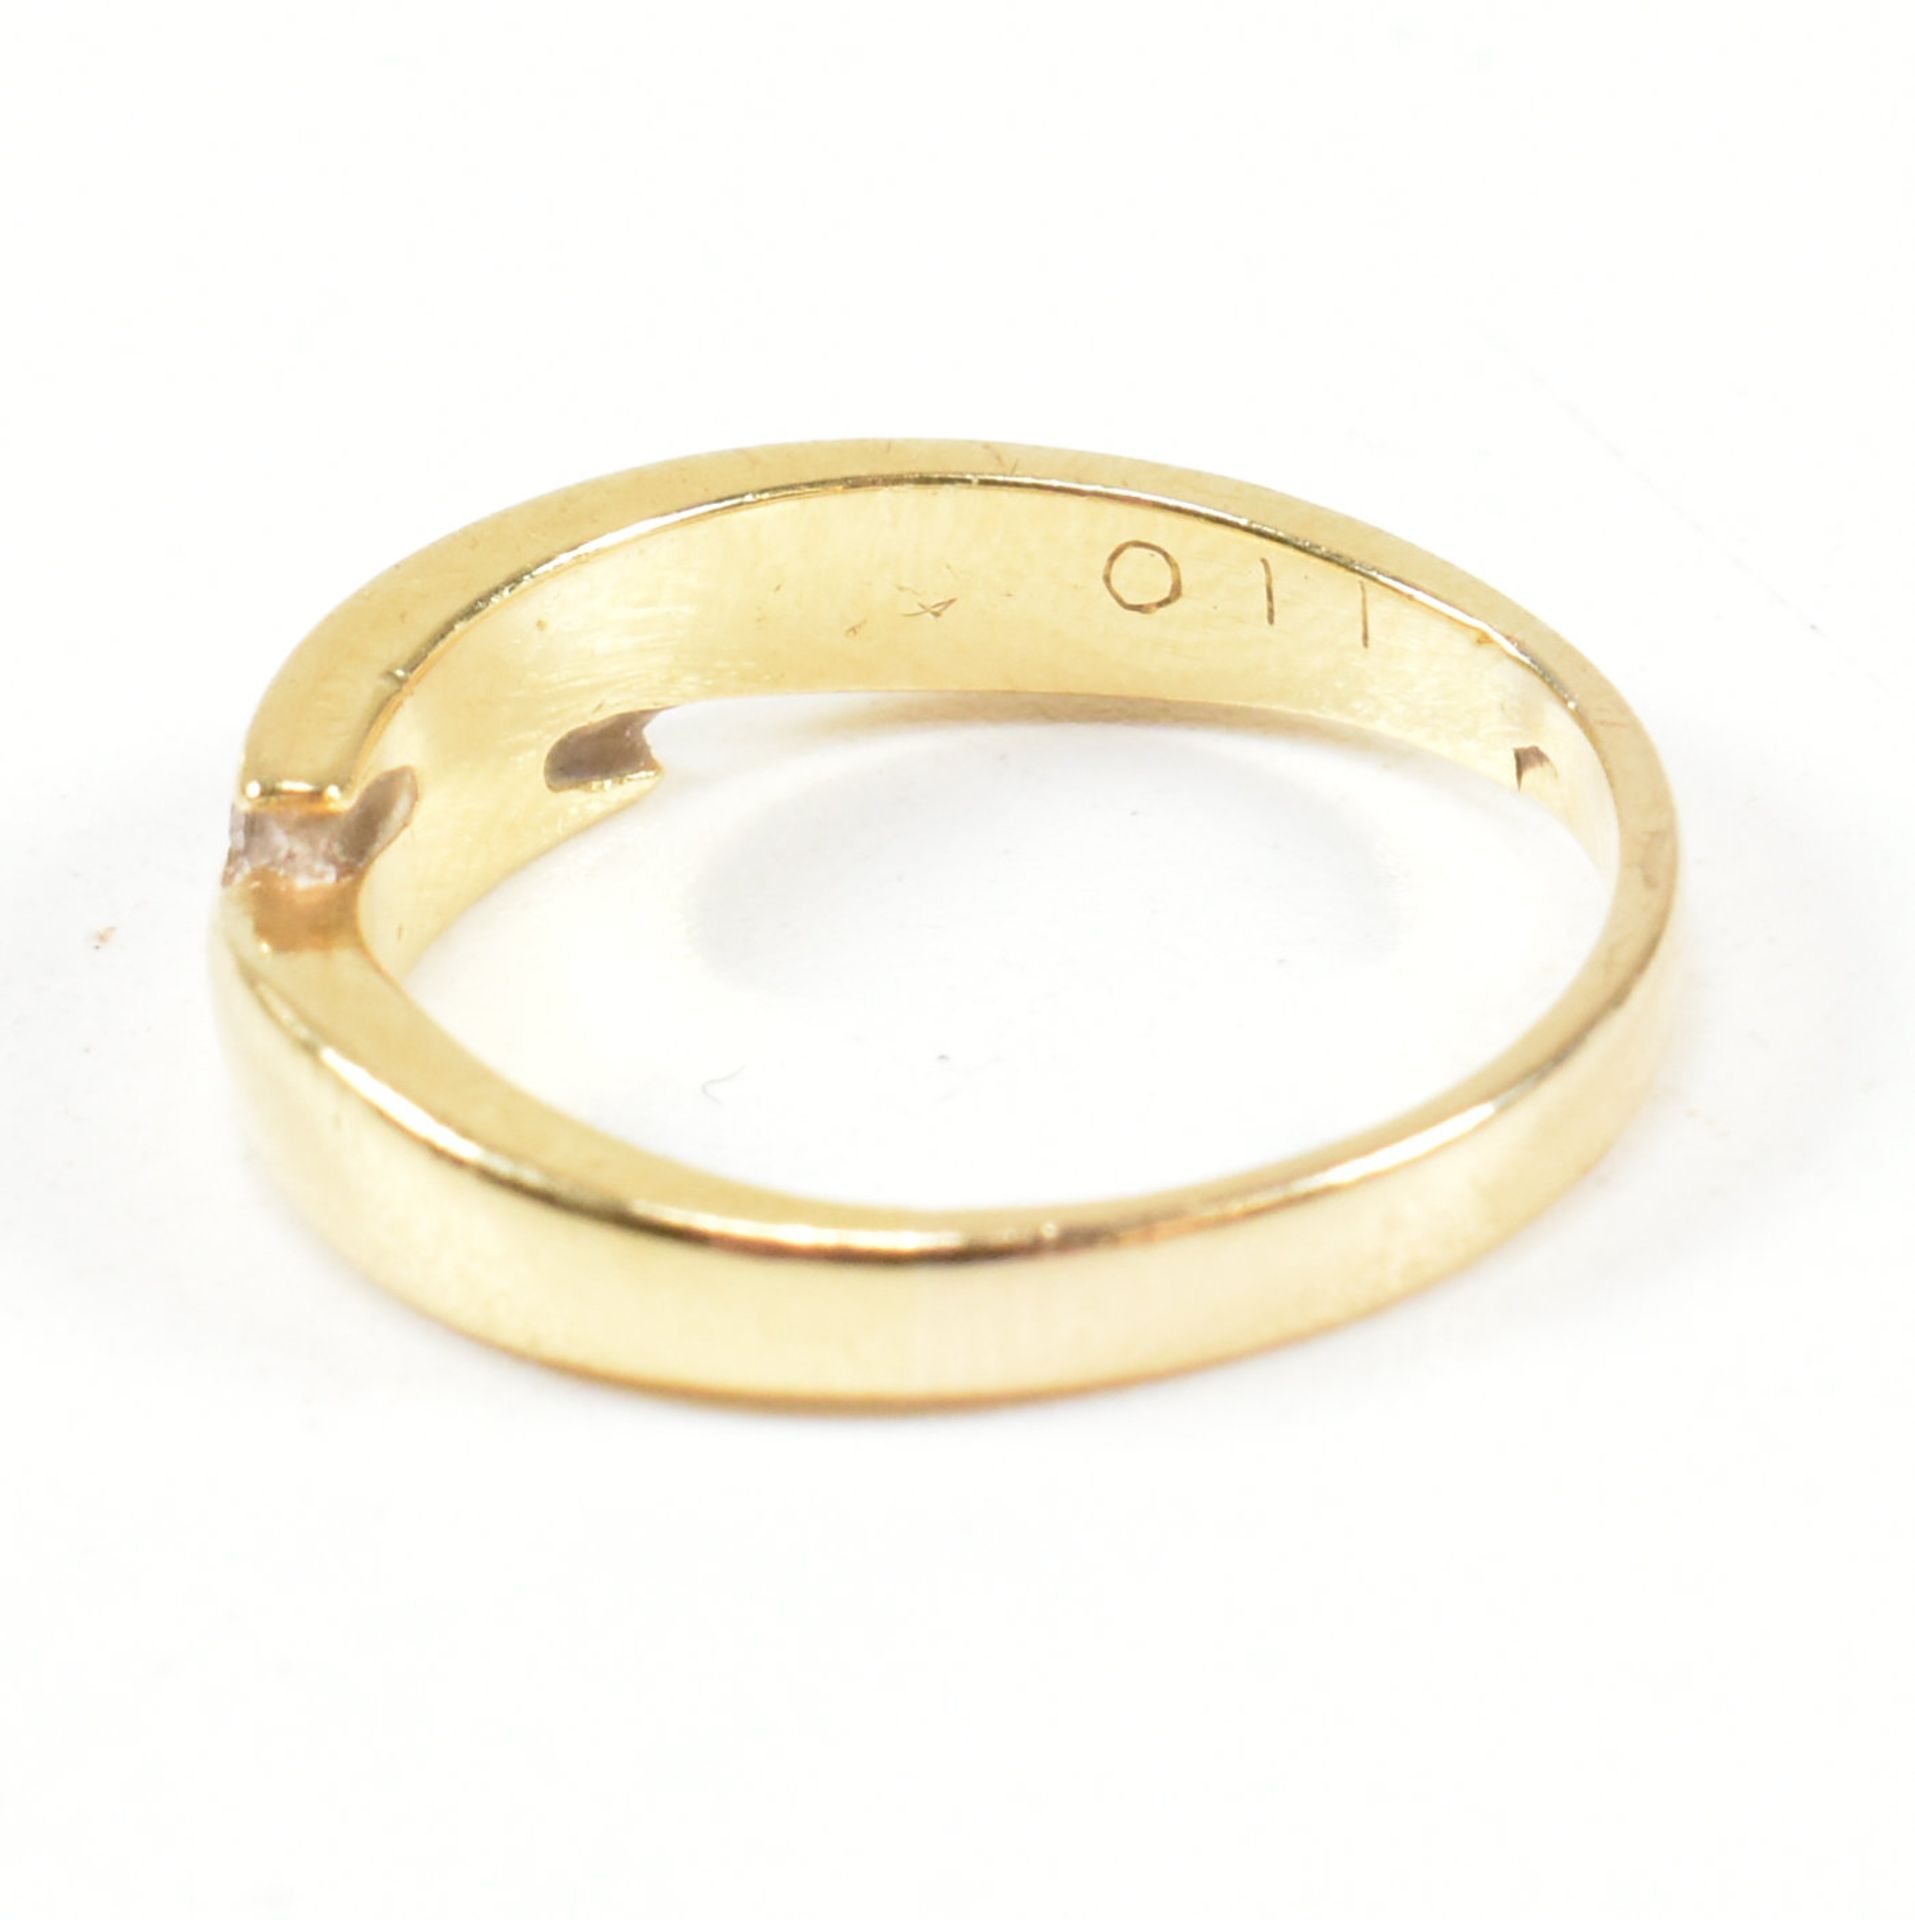 18CT GOLD & DIAMOND CROSSOVER BAND RING - Image 6 of 8